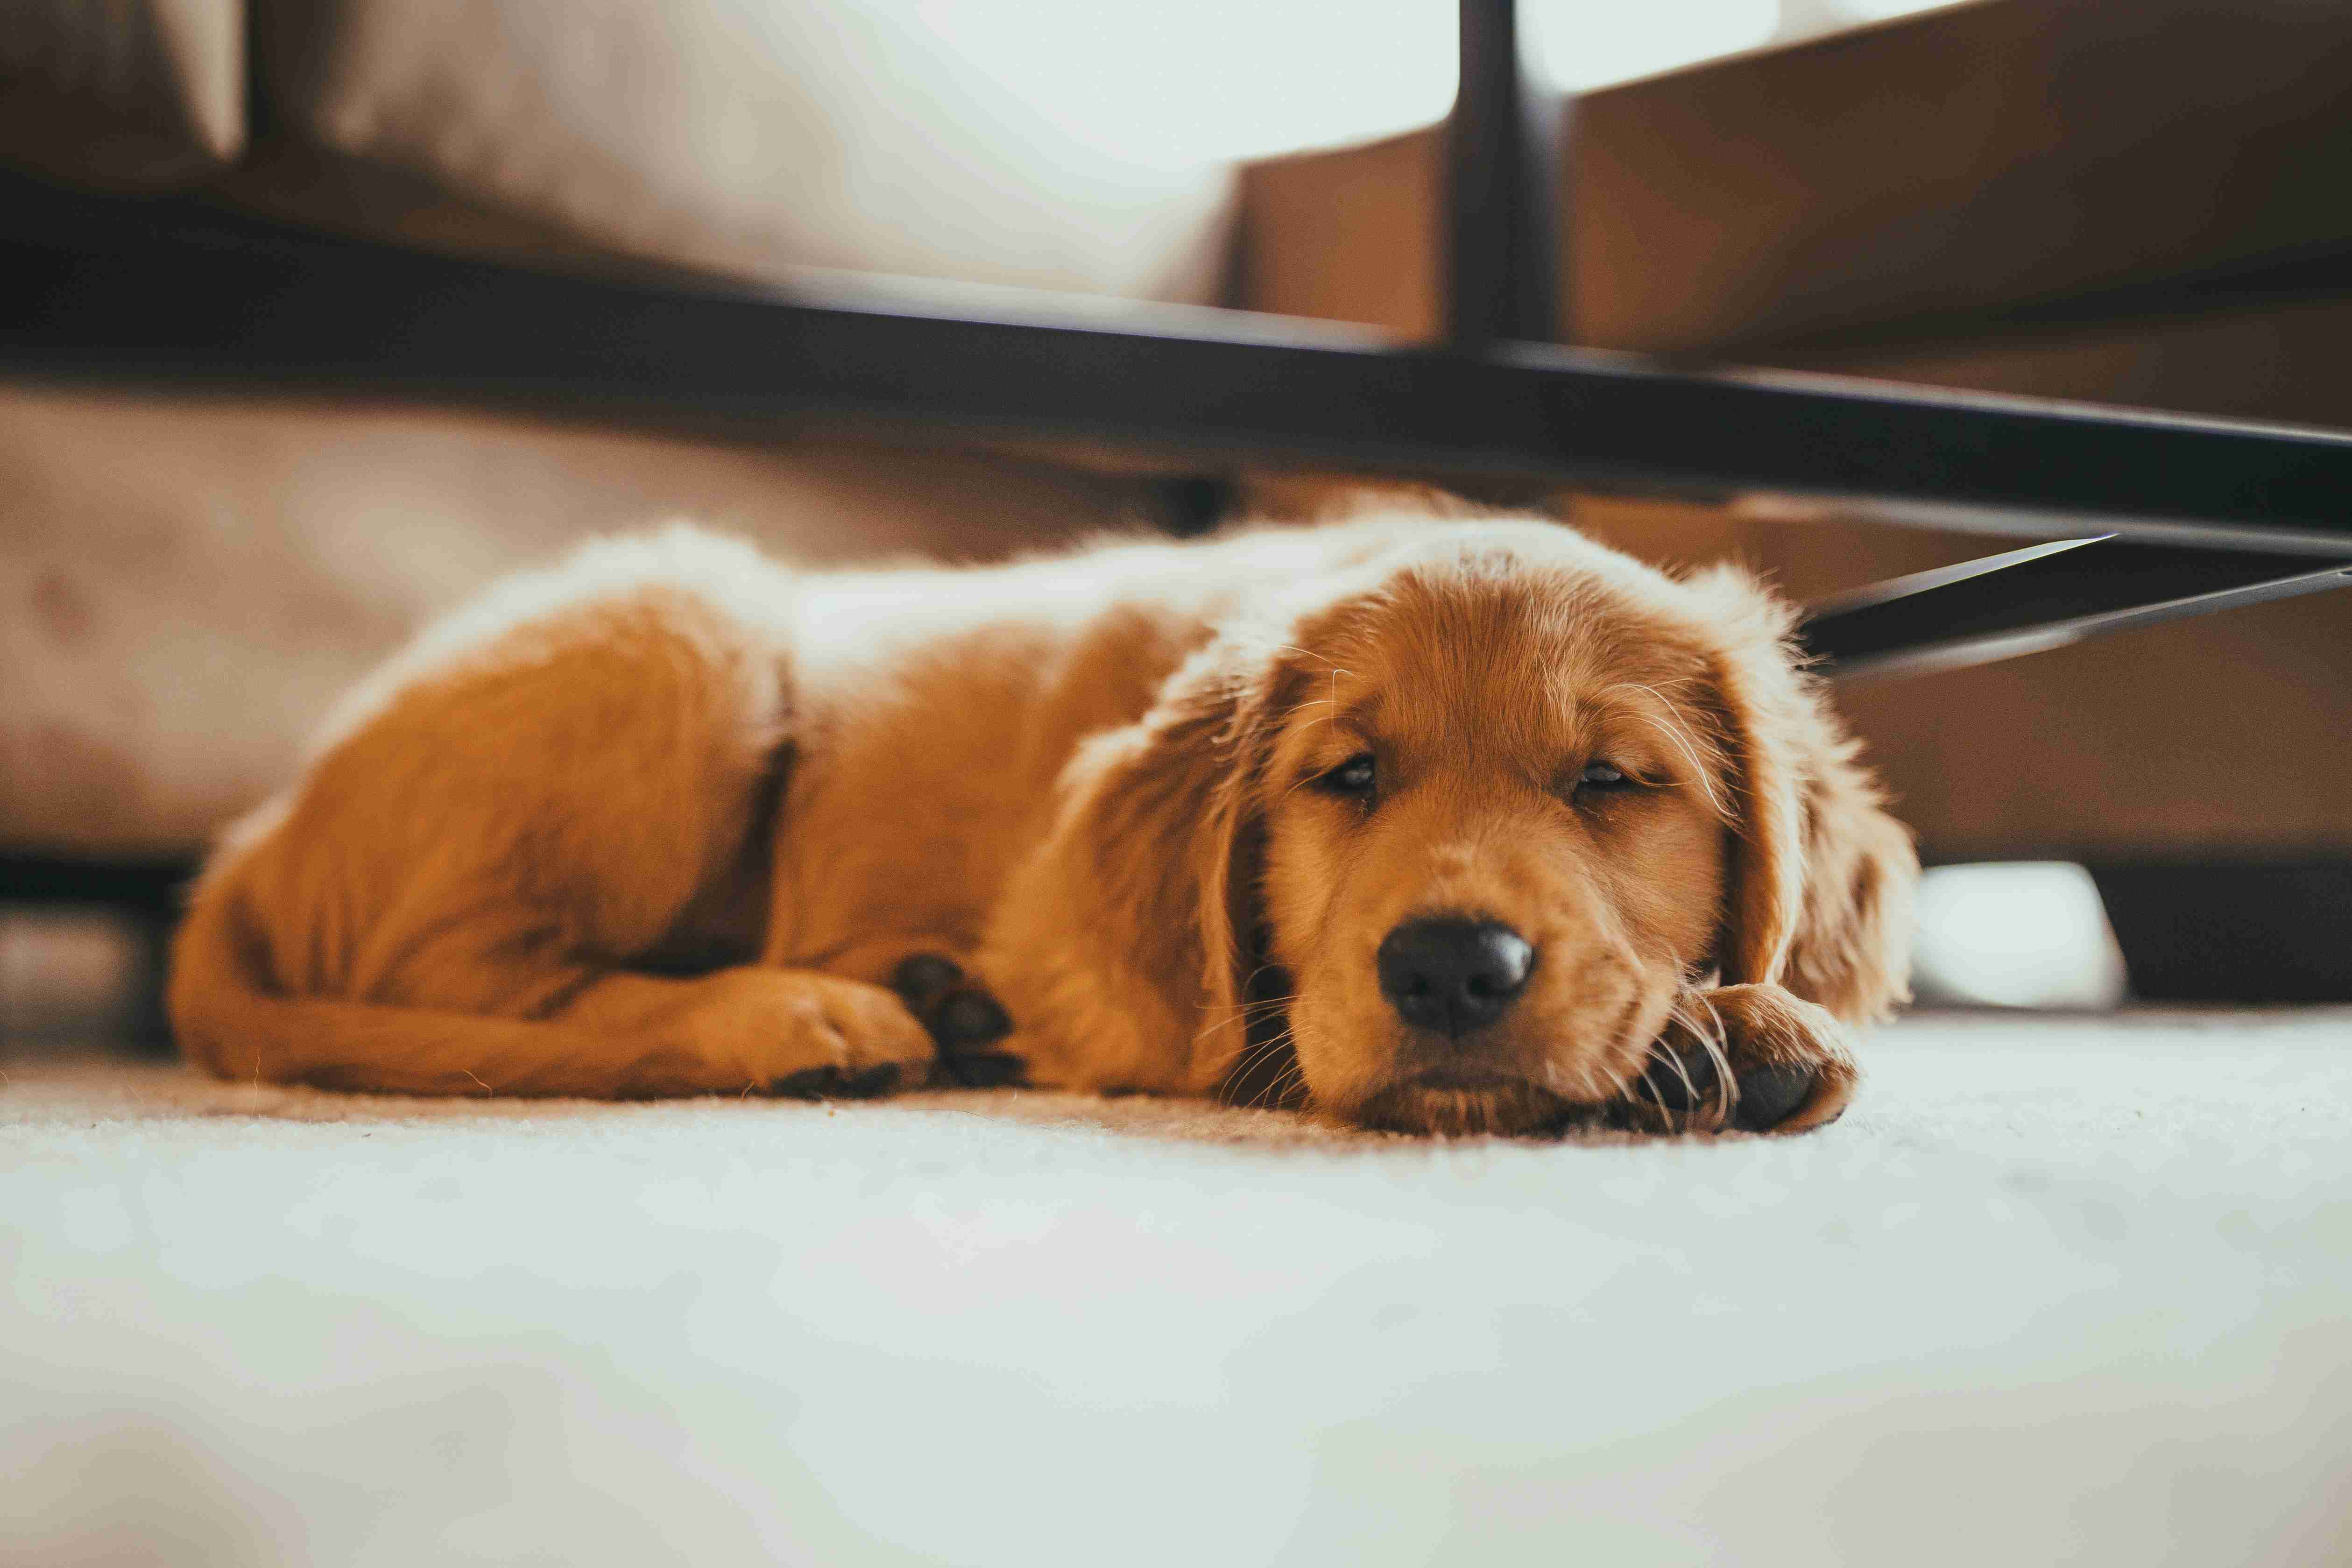 Are Golden Retrievers prone to any specific heart issues?